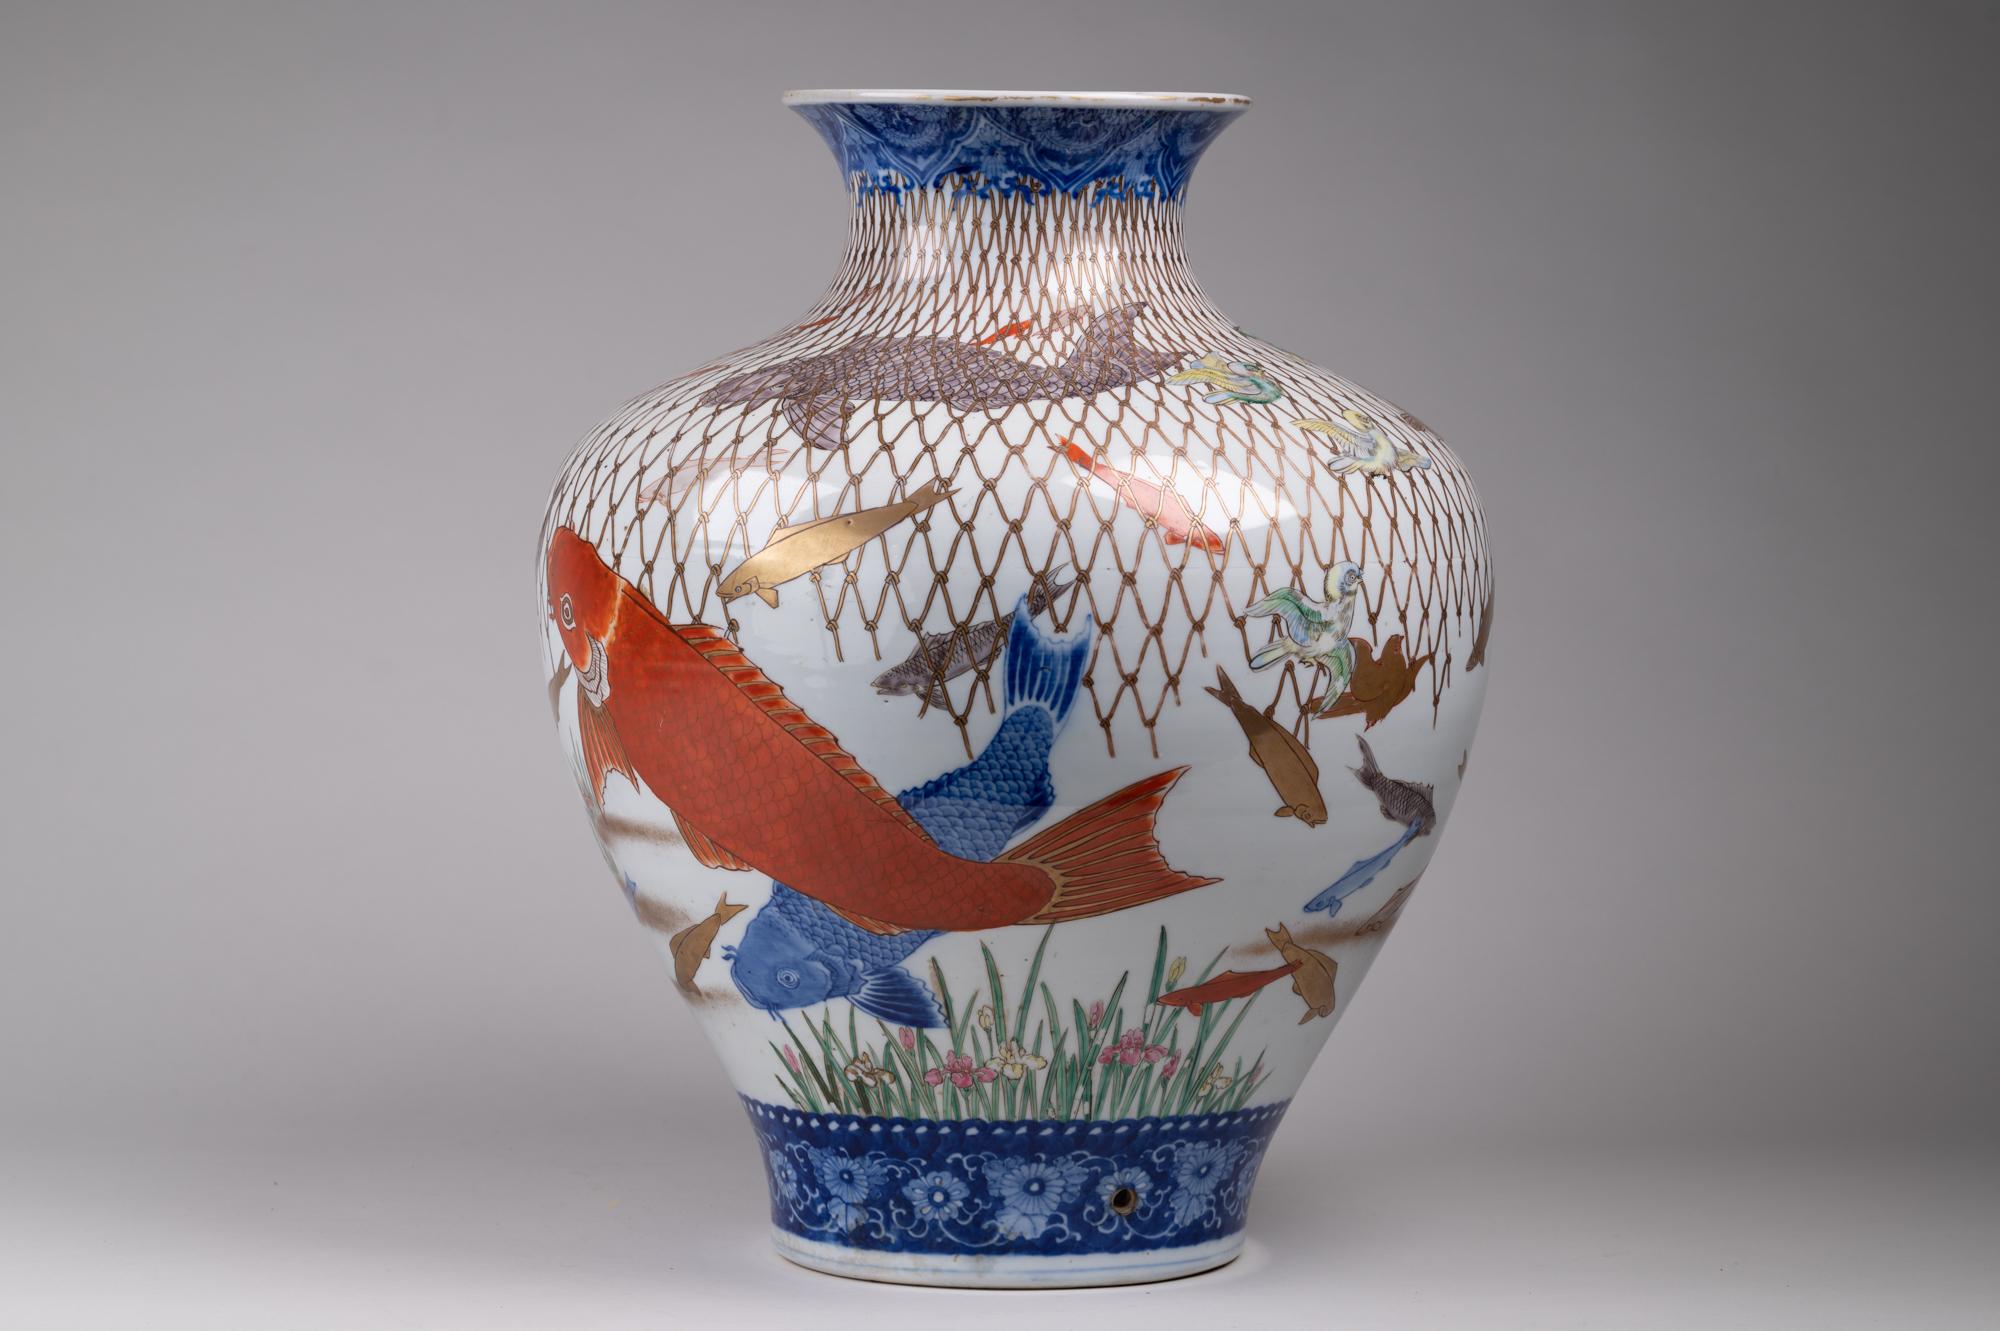 Large spectacular multicolored Imari vase. Meiji period (1868-1912) fantastical, multicolored Imari vase with very unusual subject matter of netted school of fish and flying birds above. Vase was at one point used as a lamp as there is a hole